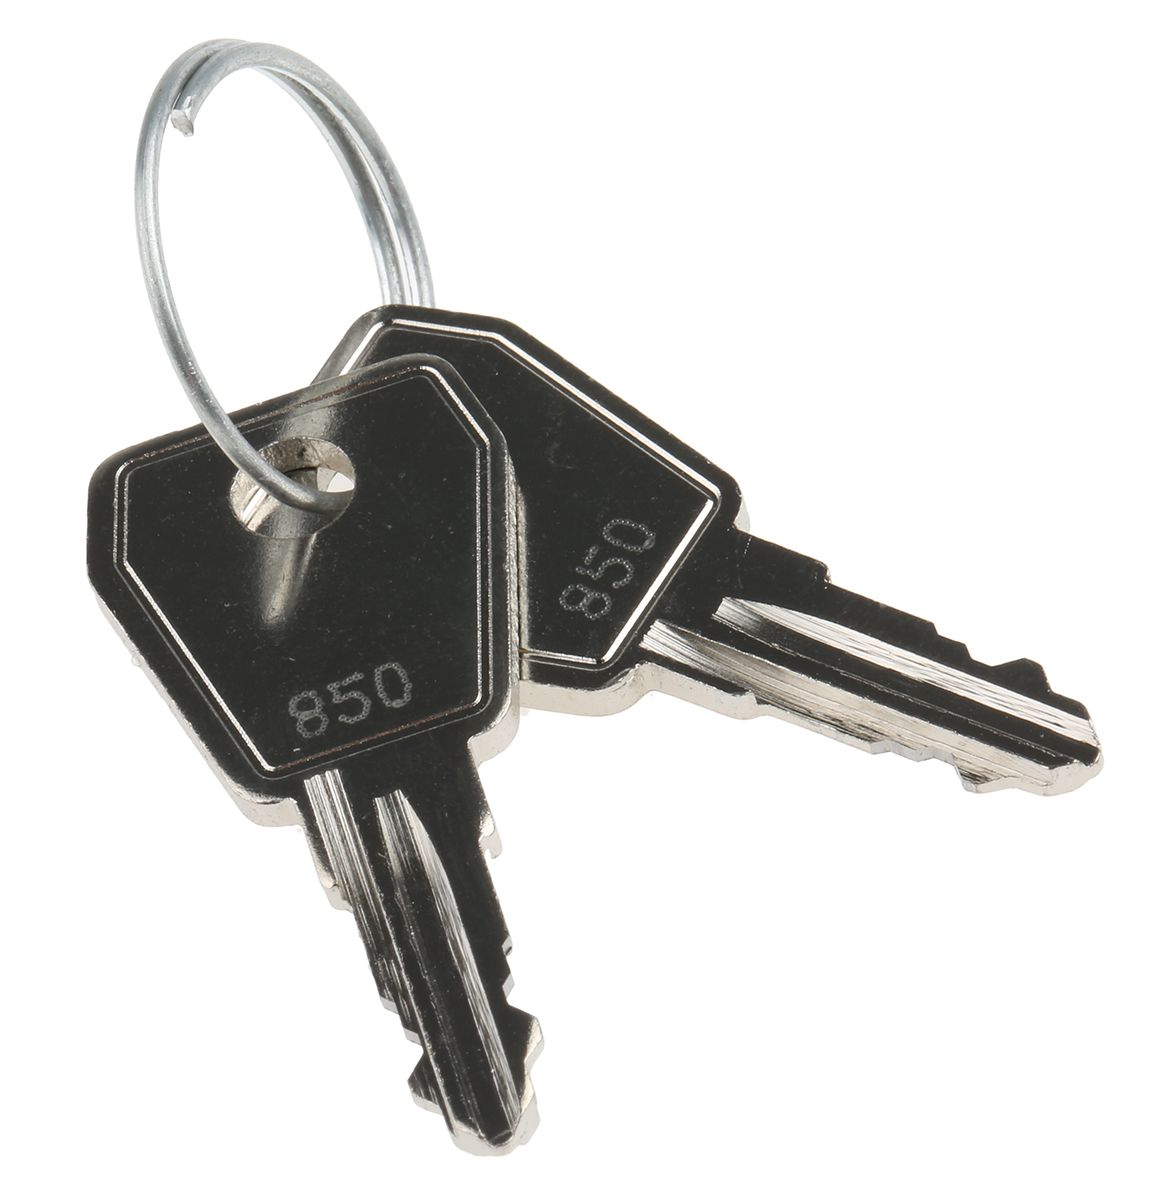 Common spare key for min keylock switch